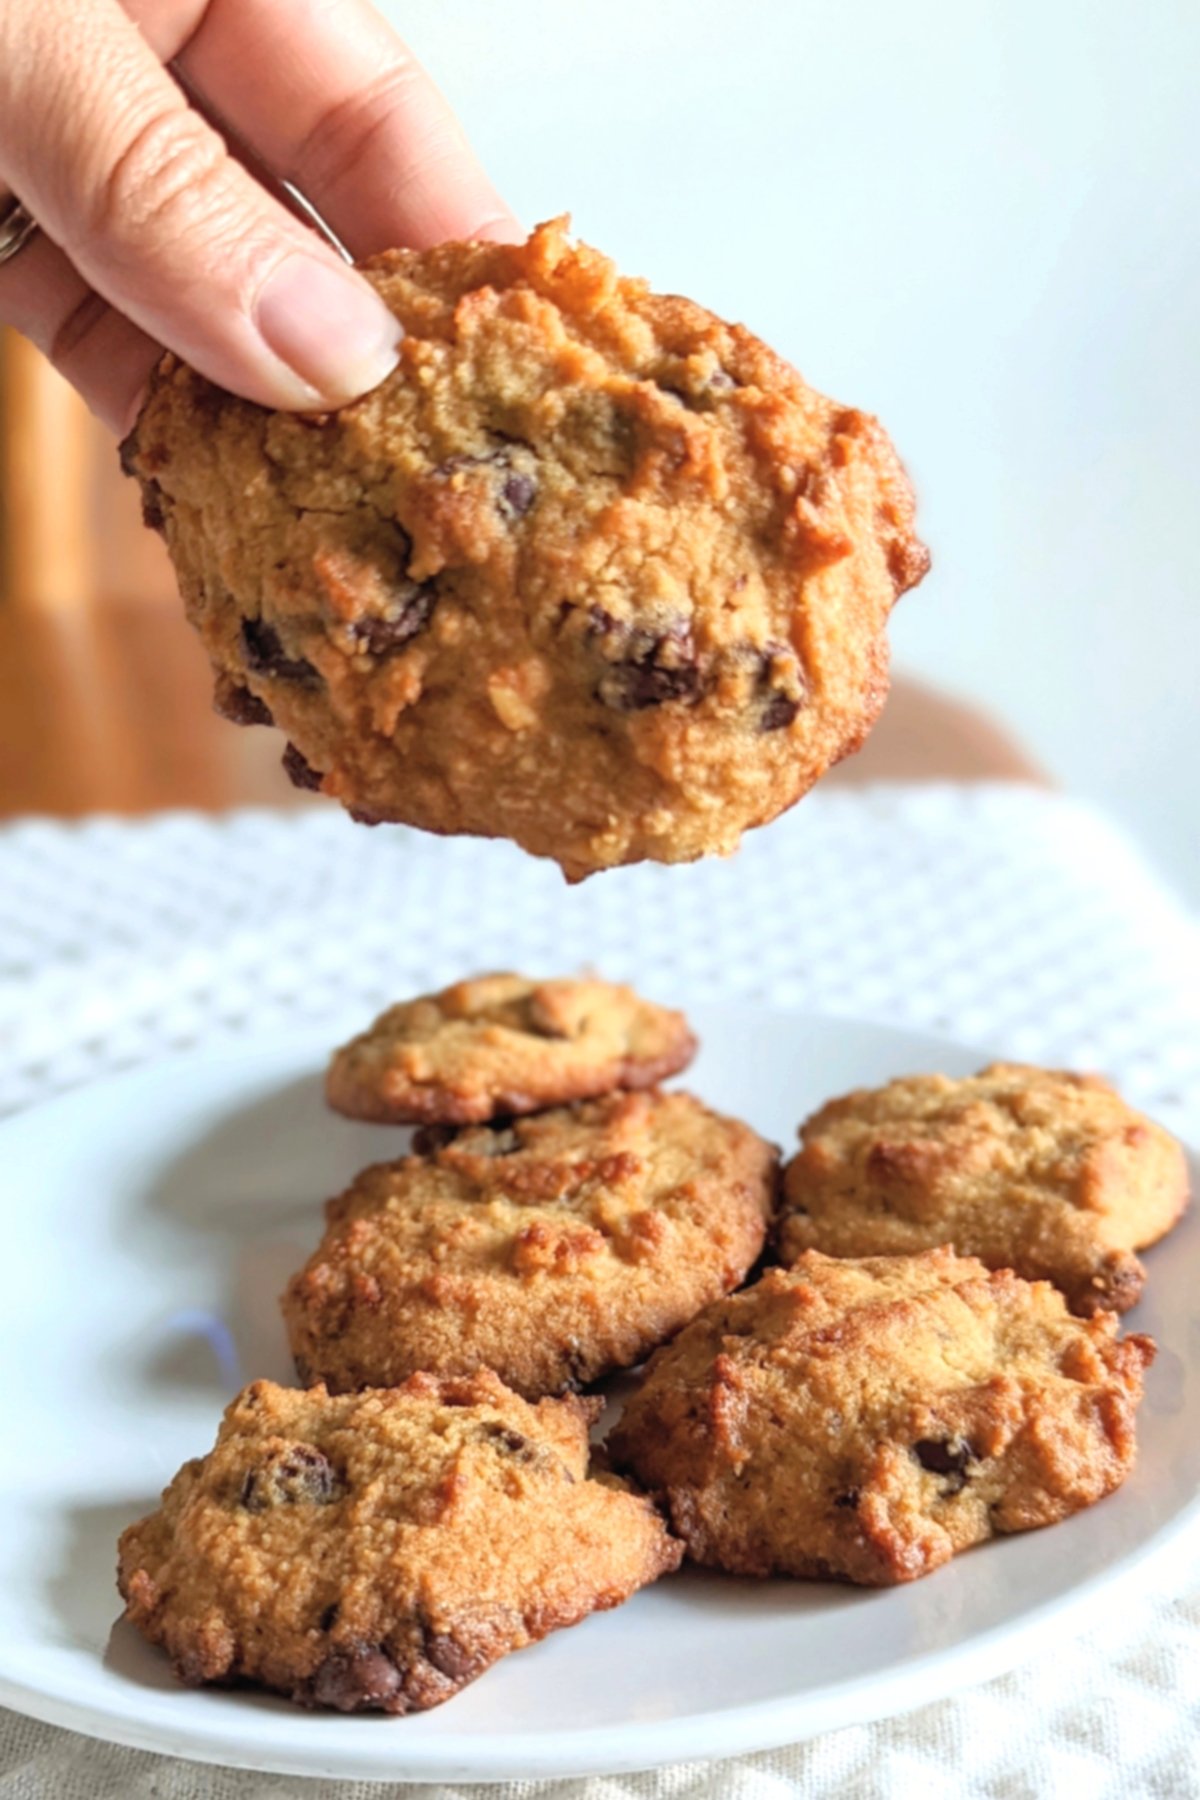 chocolate chip cookies keto low carb dessert recipe diabetic desserts for diabetics healthy diabetes friendly desserts with low carbs and almond flour 